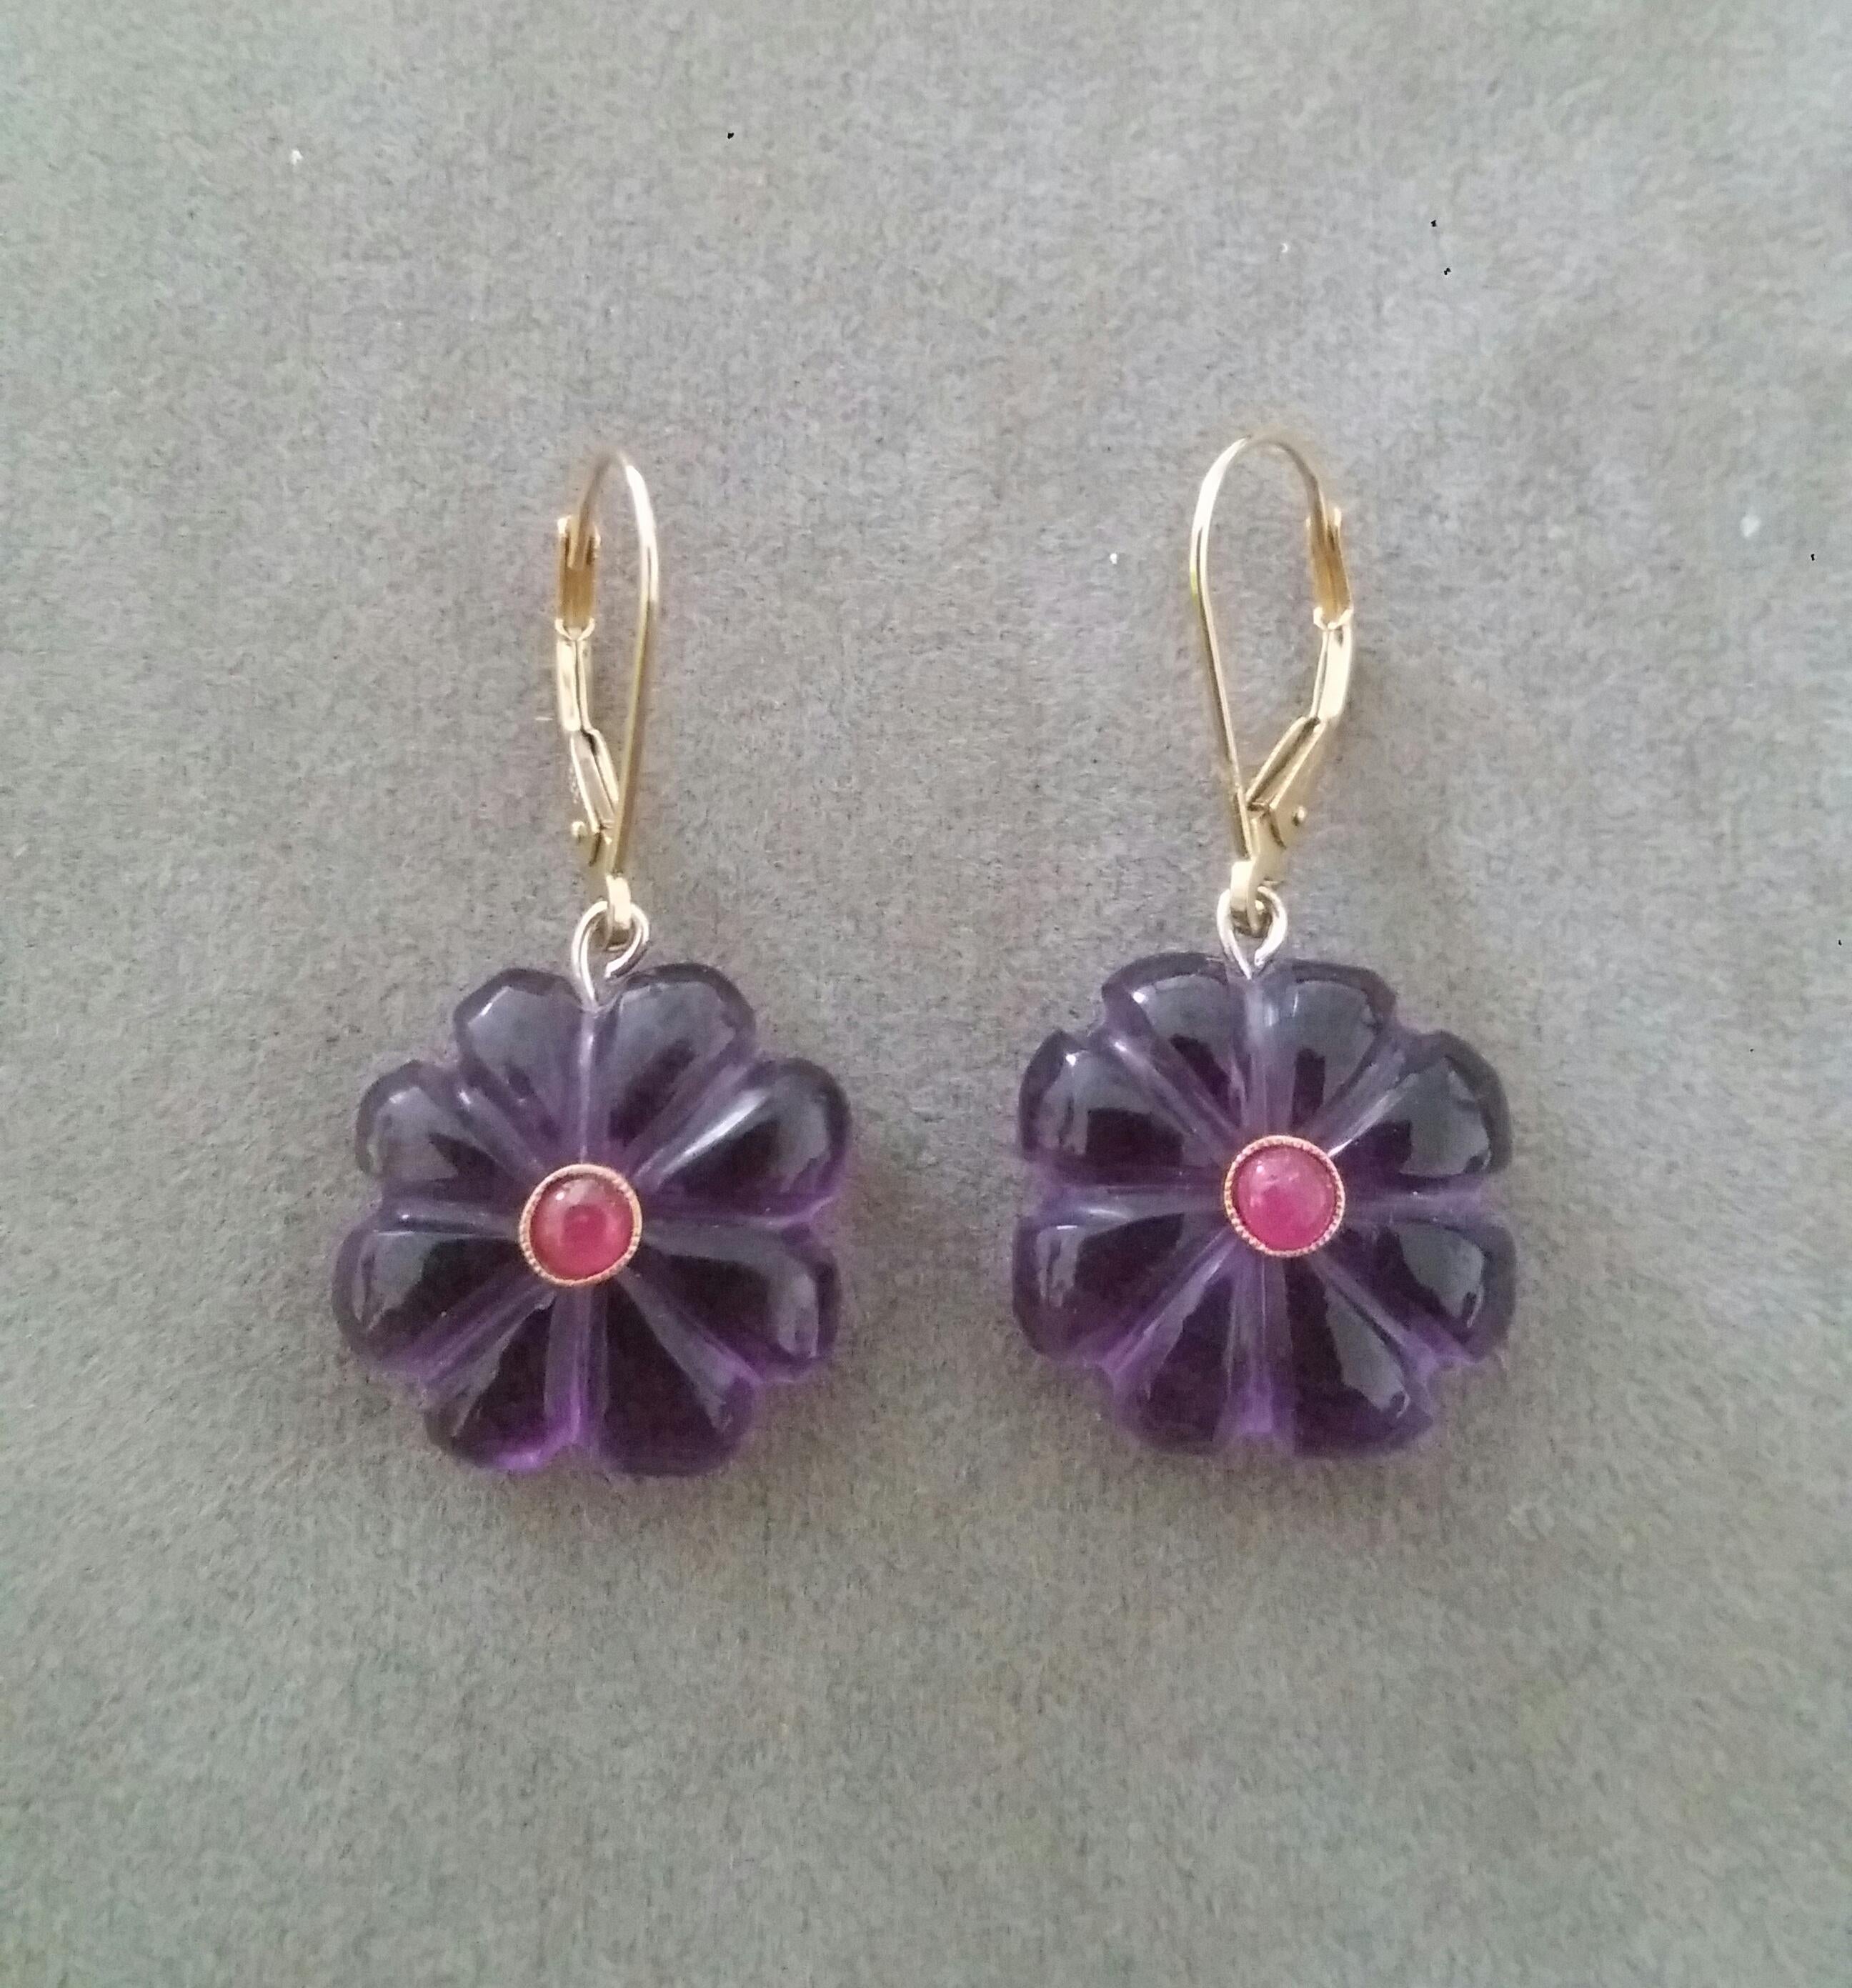 Simple chic earrings composed of 2 Natural Amethyst Carved Buttons of 16 mm in diameter with a small Ruby cabochon in the center suspended by a 14 K yellow gold clip.

In 1978 our workshop started in Italy to make simple-chic Art Deco style